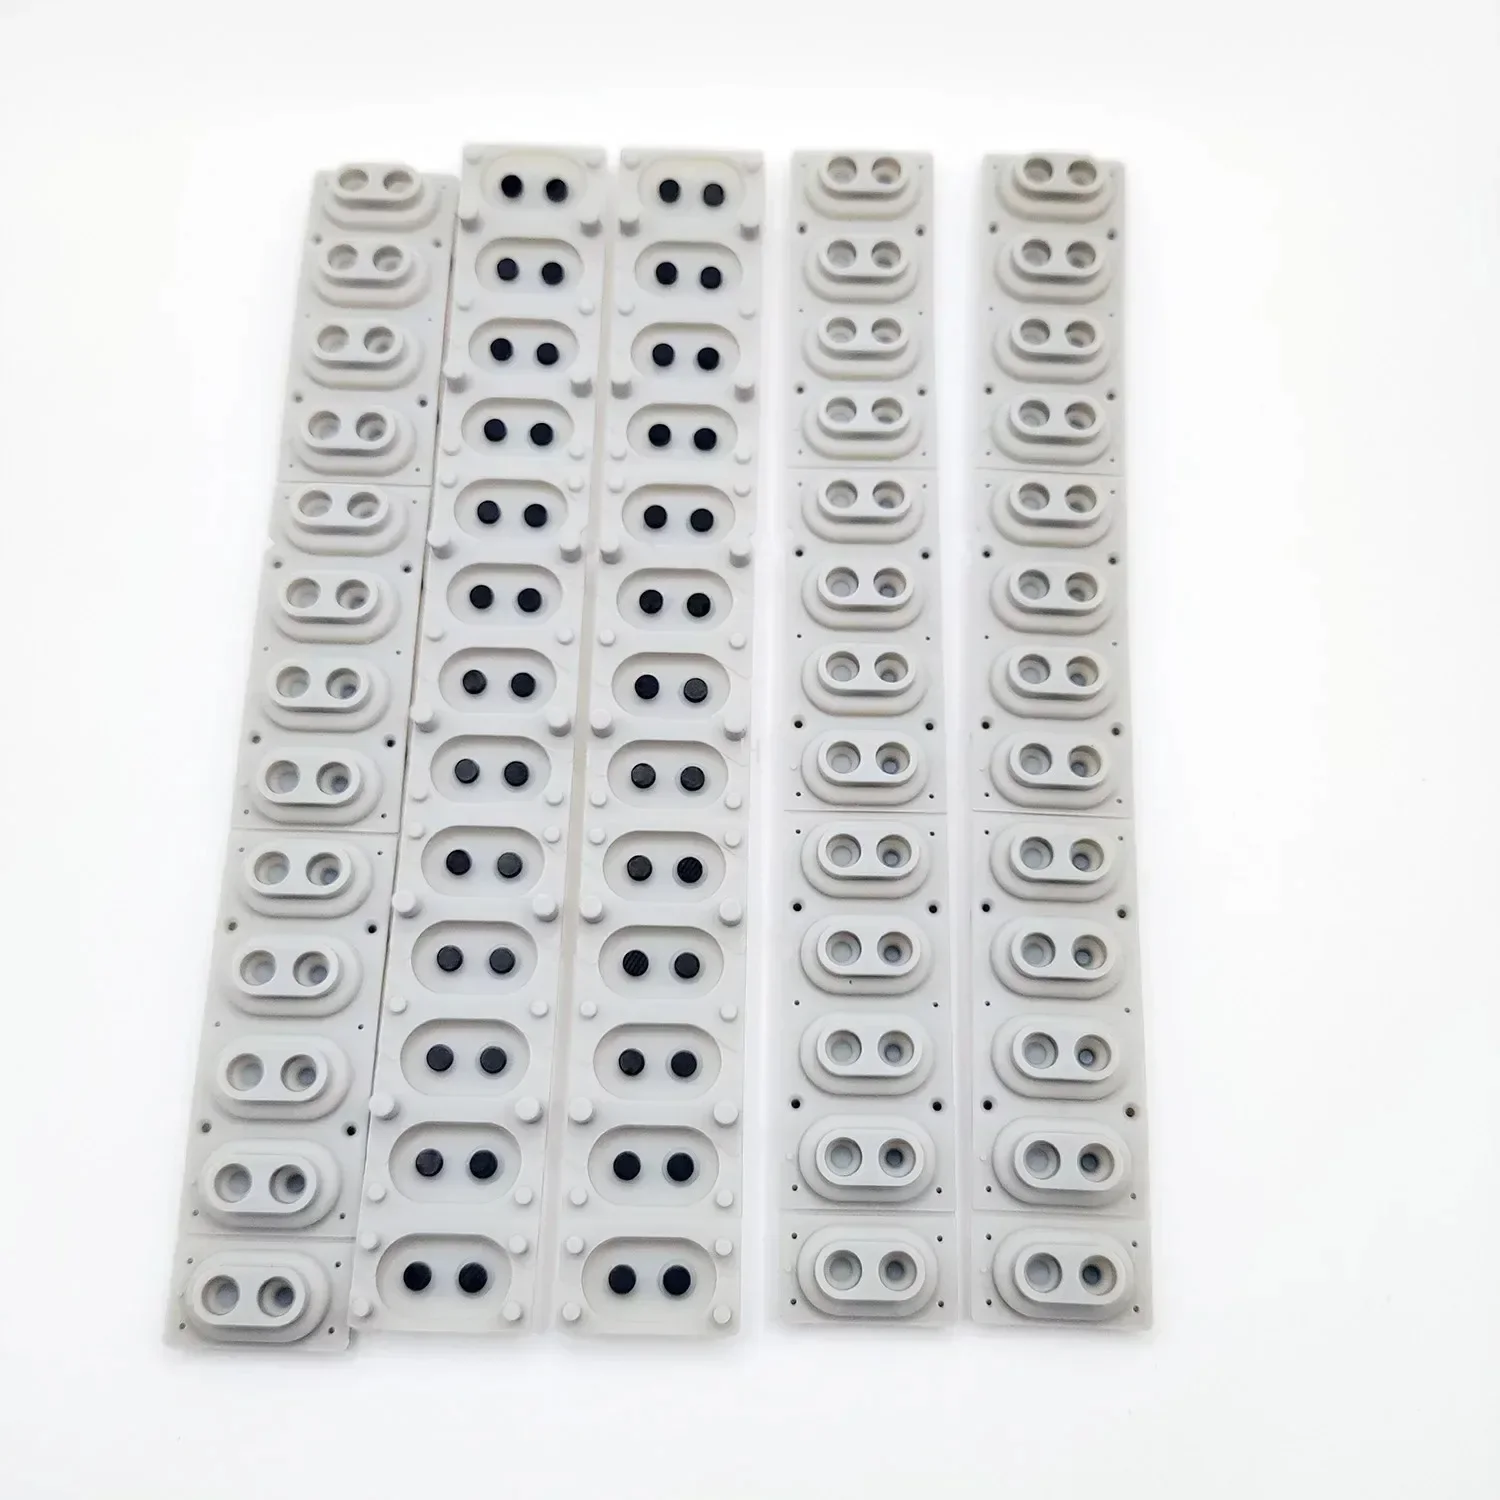 

Key Contact Rubber Conductive key pad For Nord Electric Piano C1 C2 Organ C2D Electro Lead 1,Lead 2,2x,3,4,A1 Stage